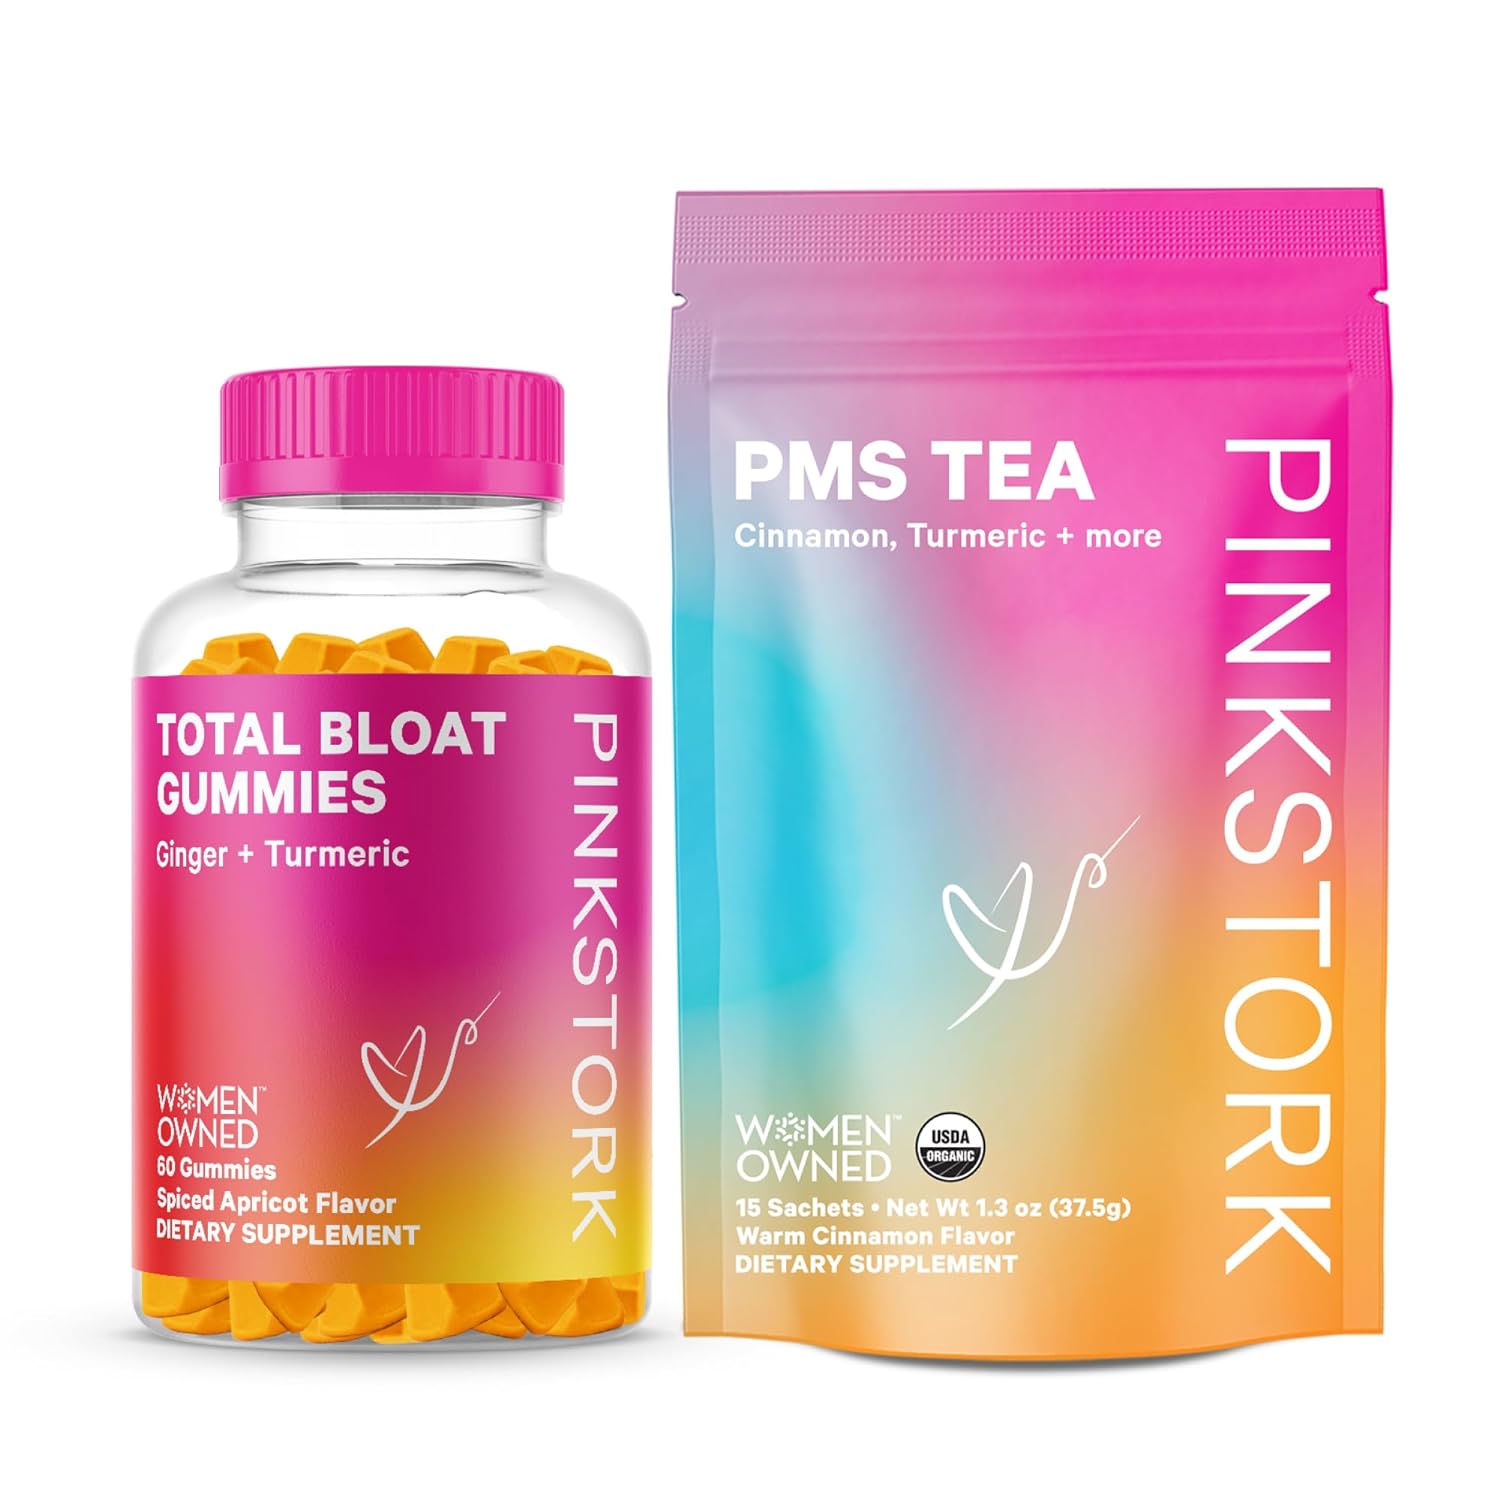 Pink Stork PMS Tea + Gummies for Hormone Balance, and Bloating, Period Support - Organic Cinnamon Tea with Vitex and Turmeric Bloat Supplements for Women and Teens, Set of 2